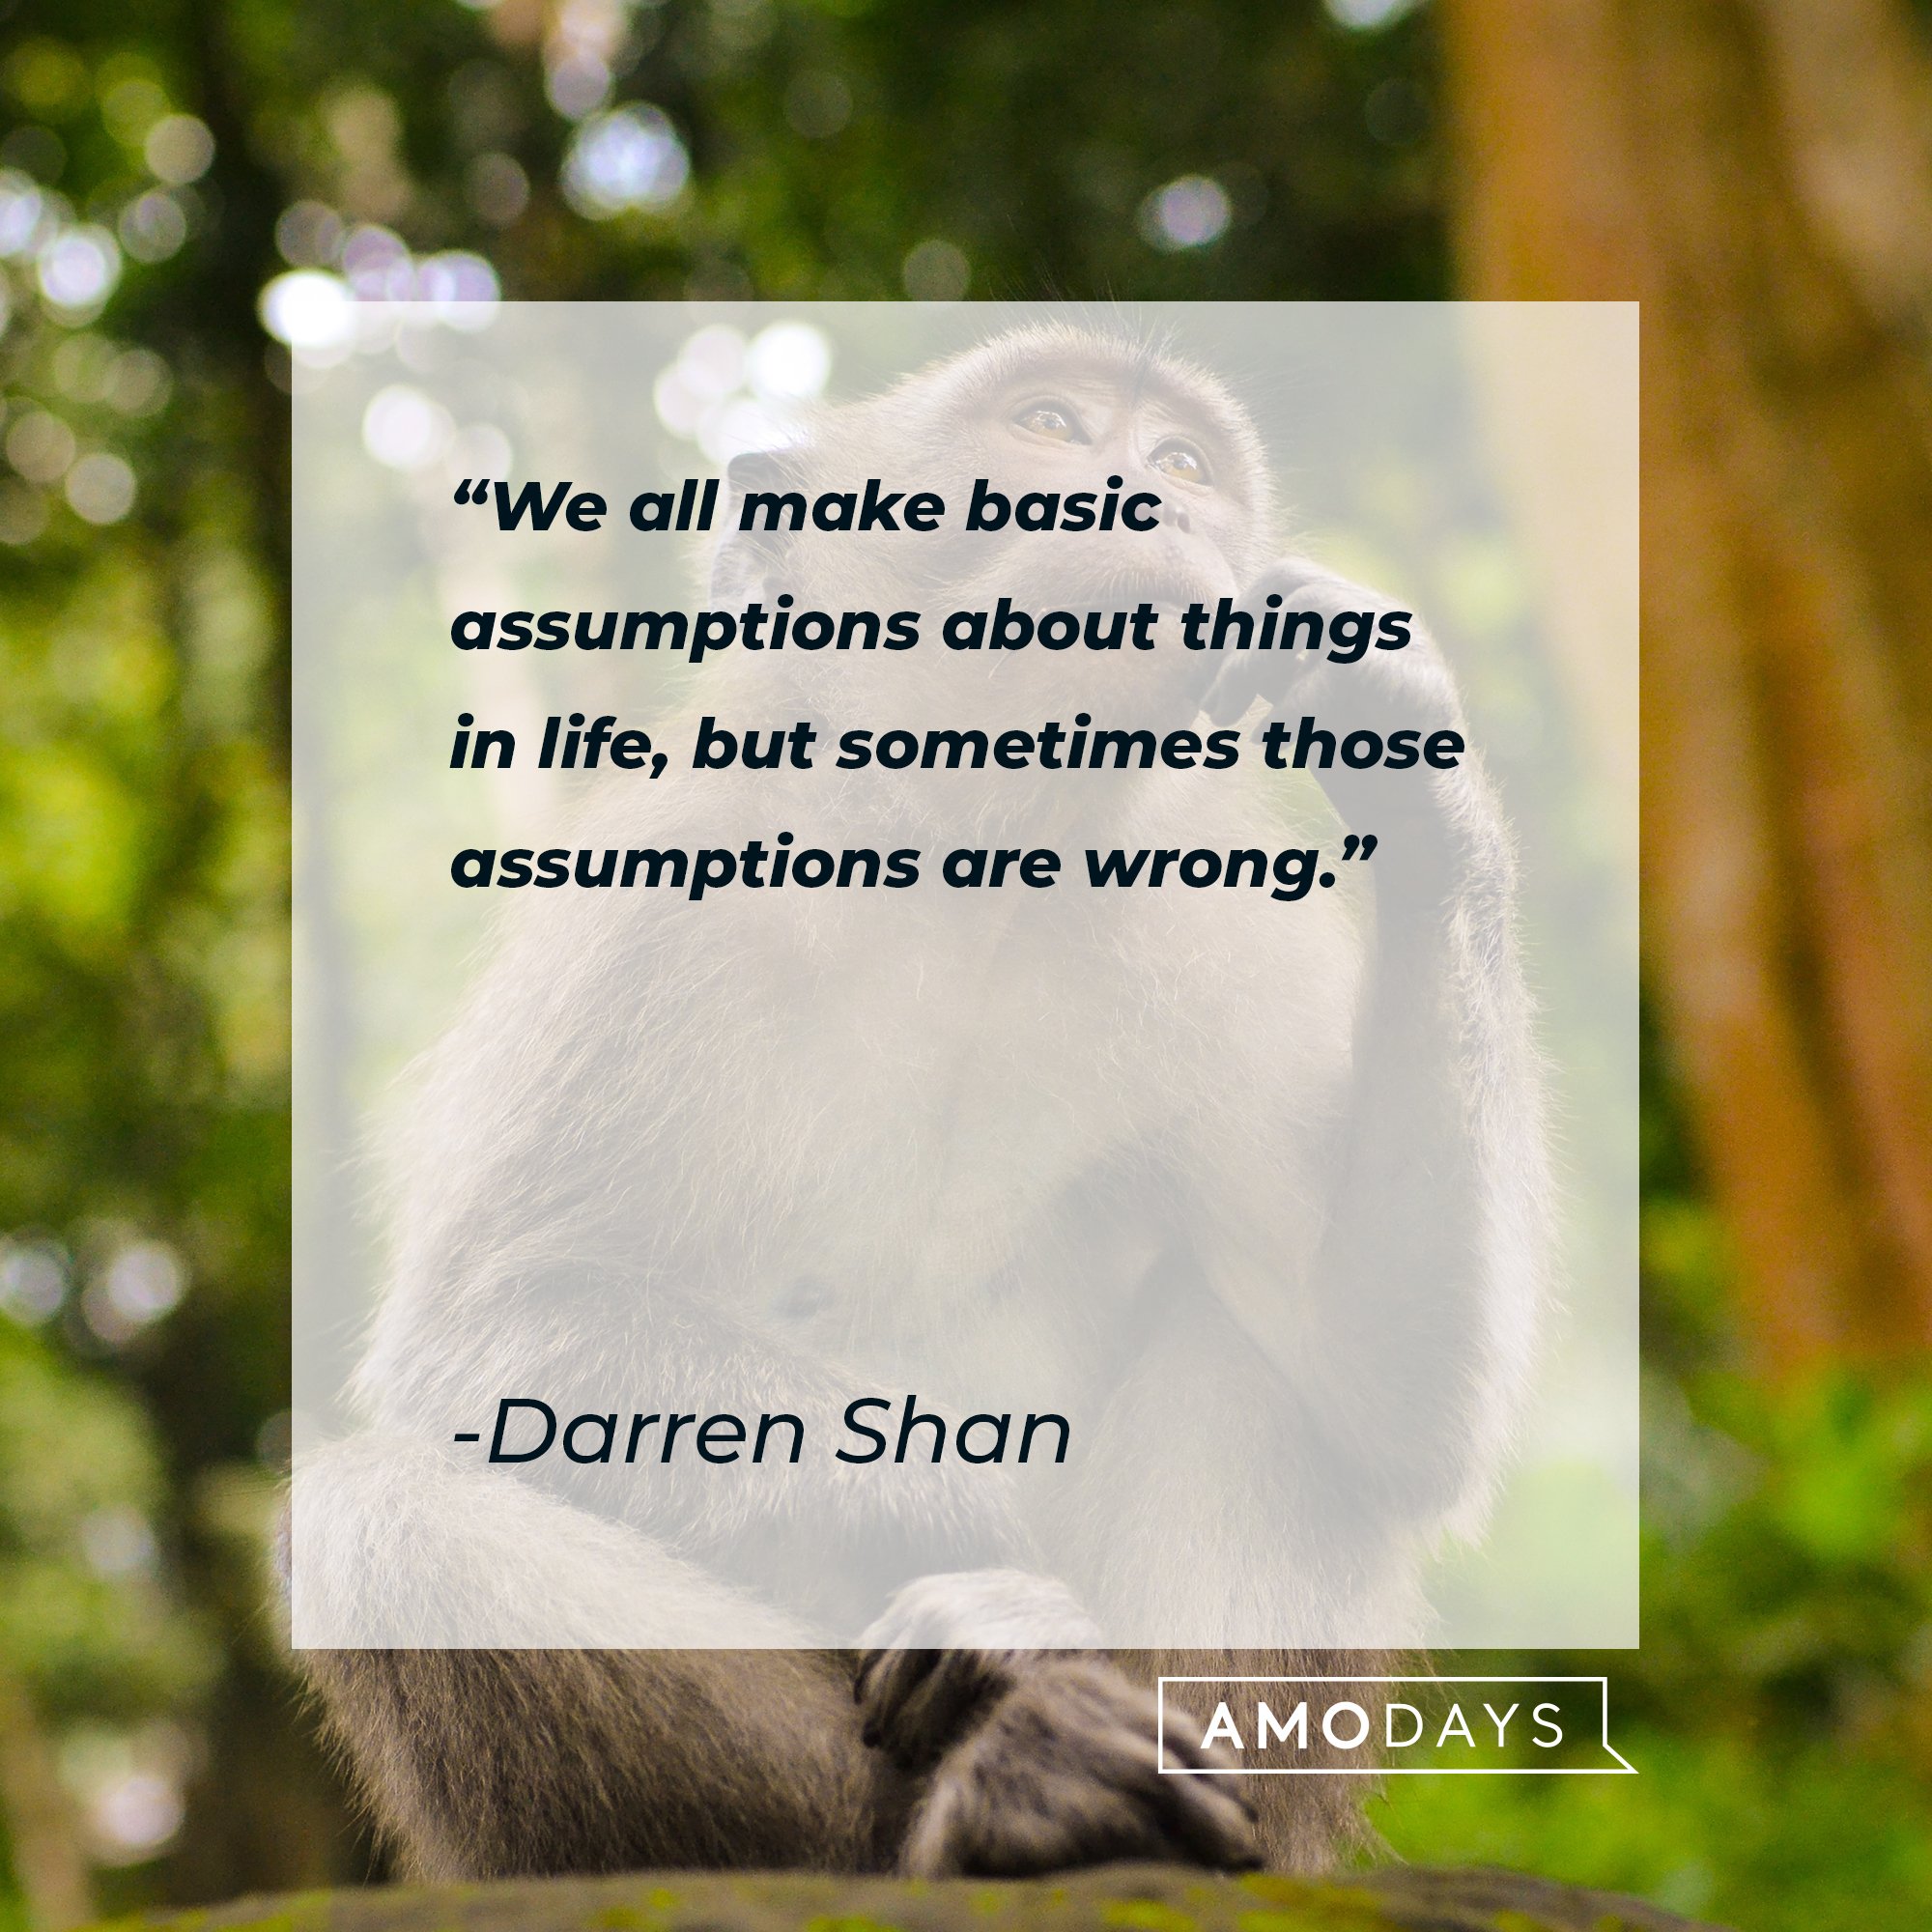 Darren Shan’s quote: “We all make basic assumptions about things in life, but sometimes those assumptions are wrong.” | Image: AmoDays